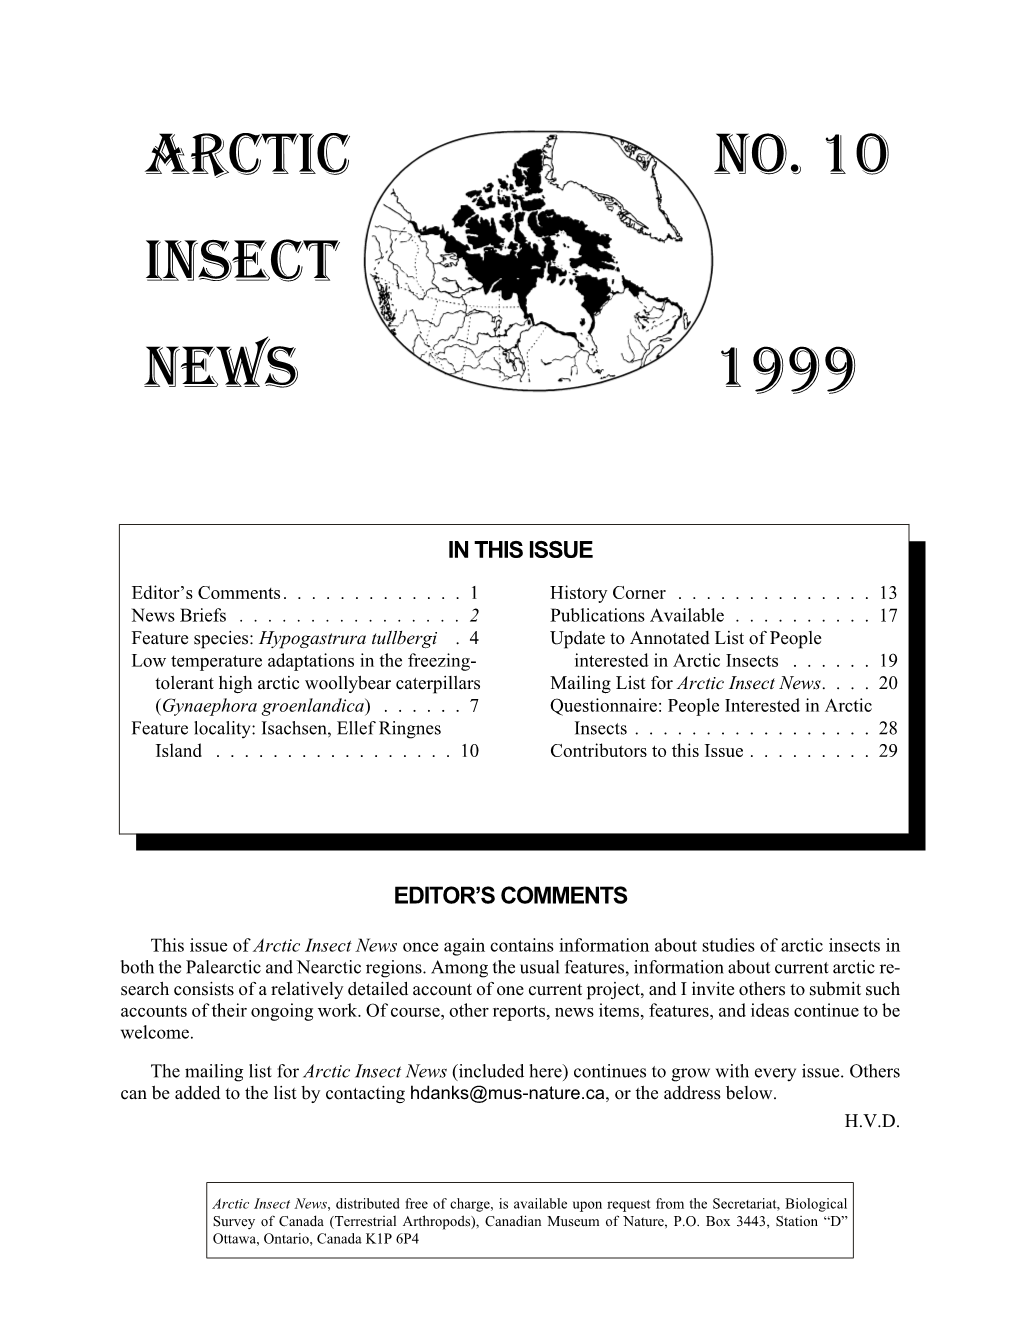 No. 10 1999 ARC TIC in SECT NEWS